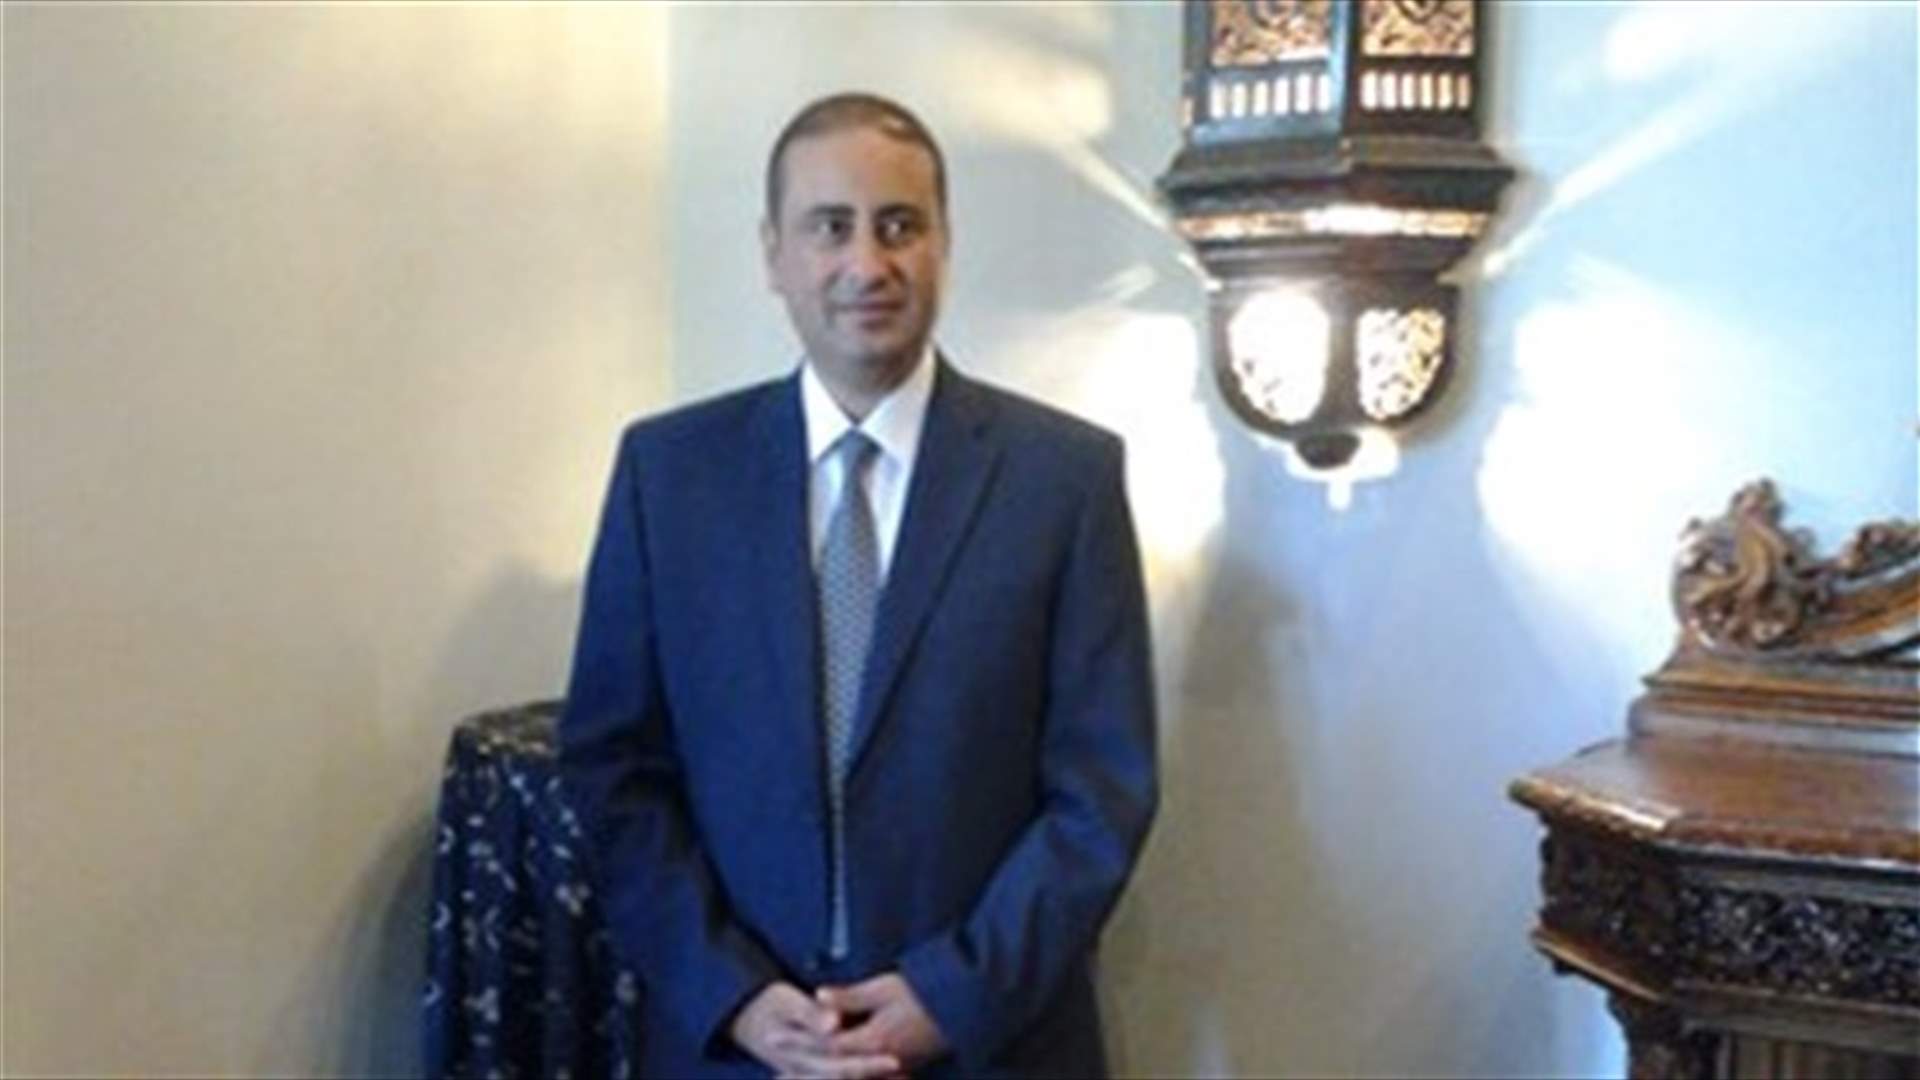 Egyptian judge facing corruption charge hangs himself -lawyer